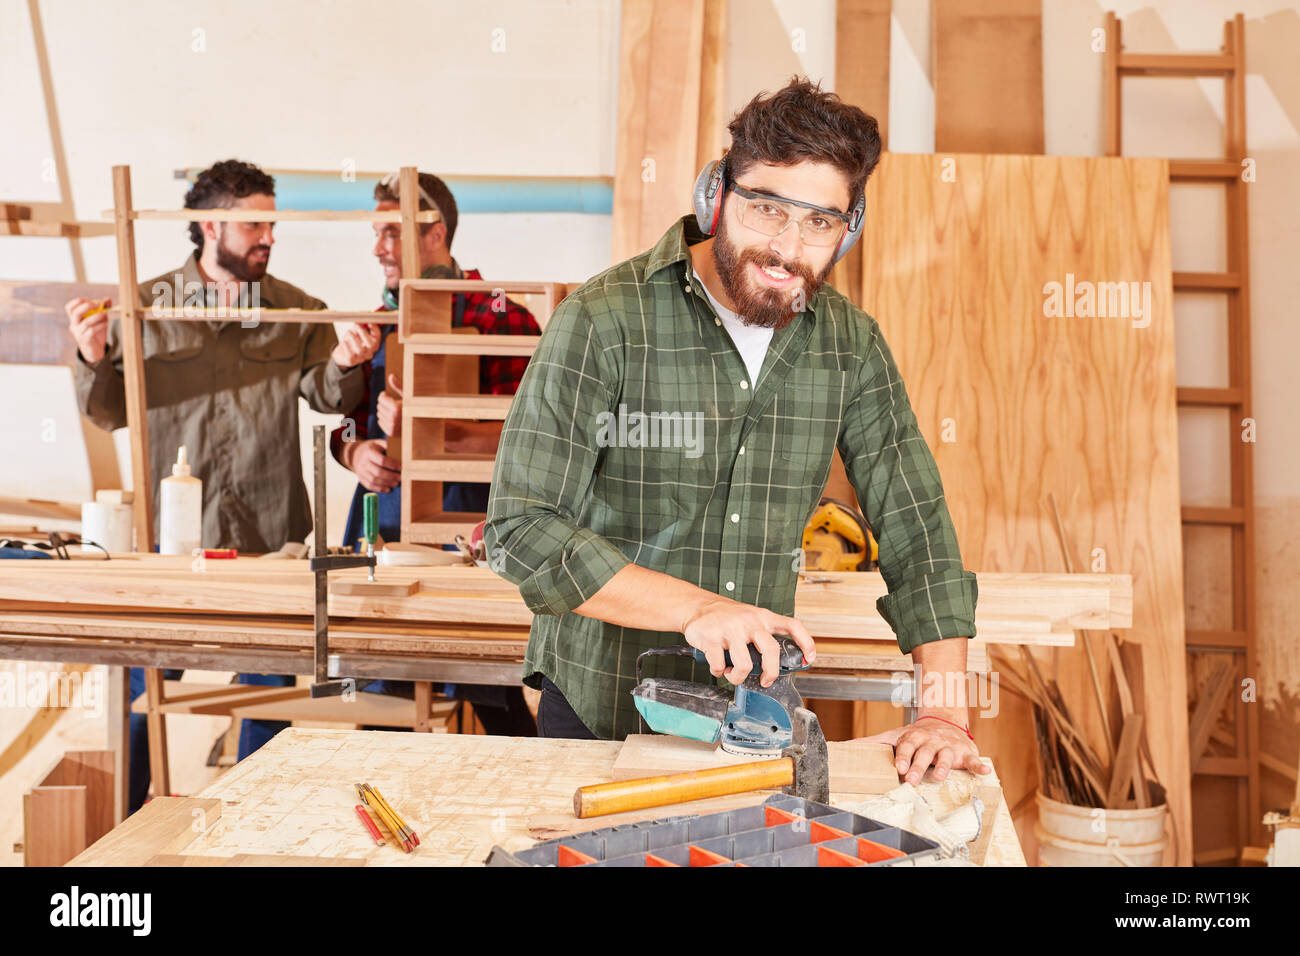 Young Man As A Carpenter Apprentice Works With The Grinder In The Joinery Stock Photo Alamy